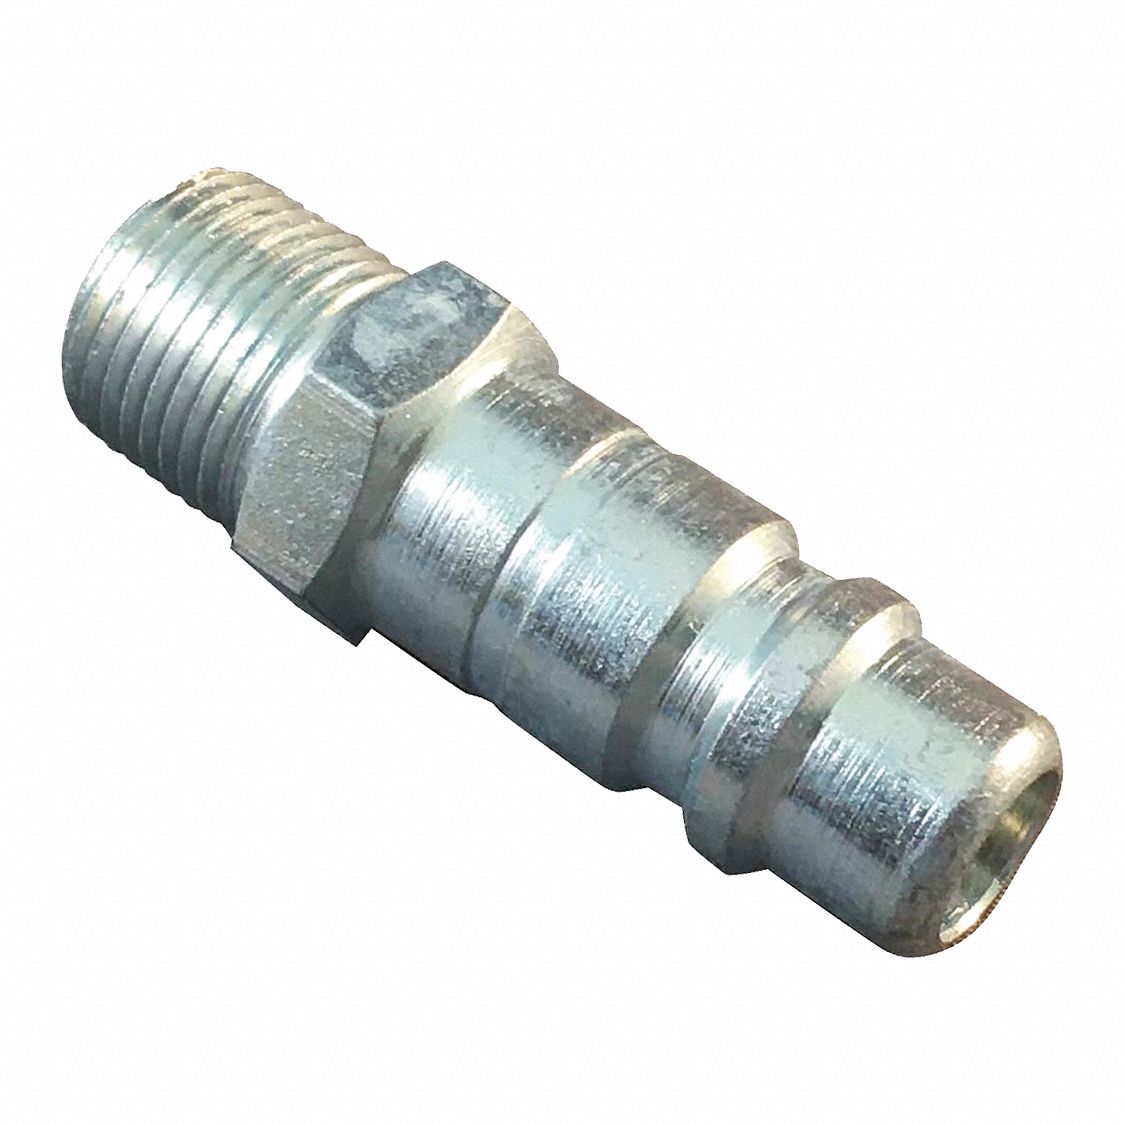 Genuine Twin Hydraulic Breaker Hose Complete With Quick Release Couplings